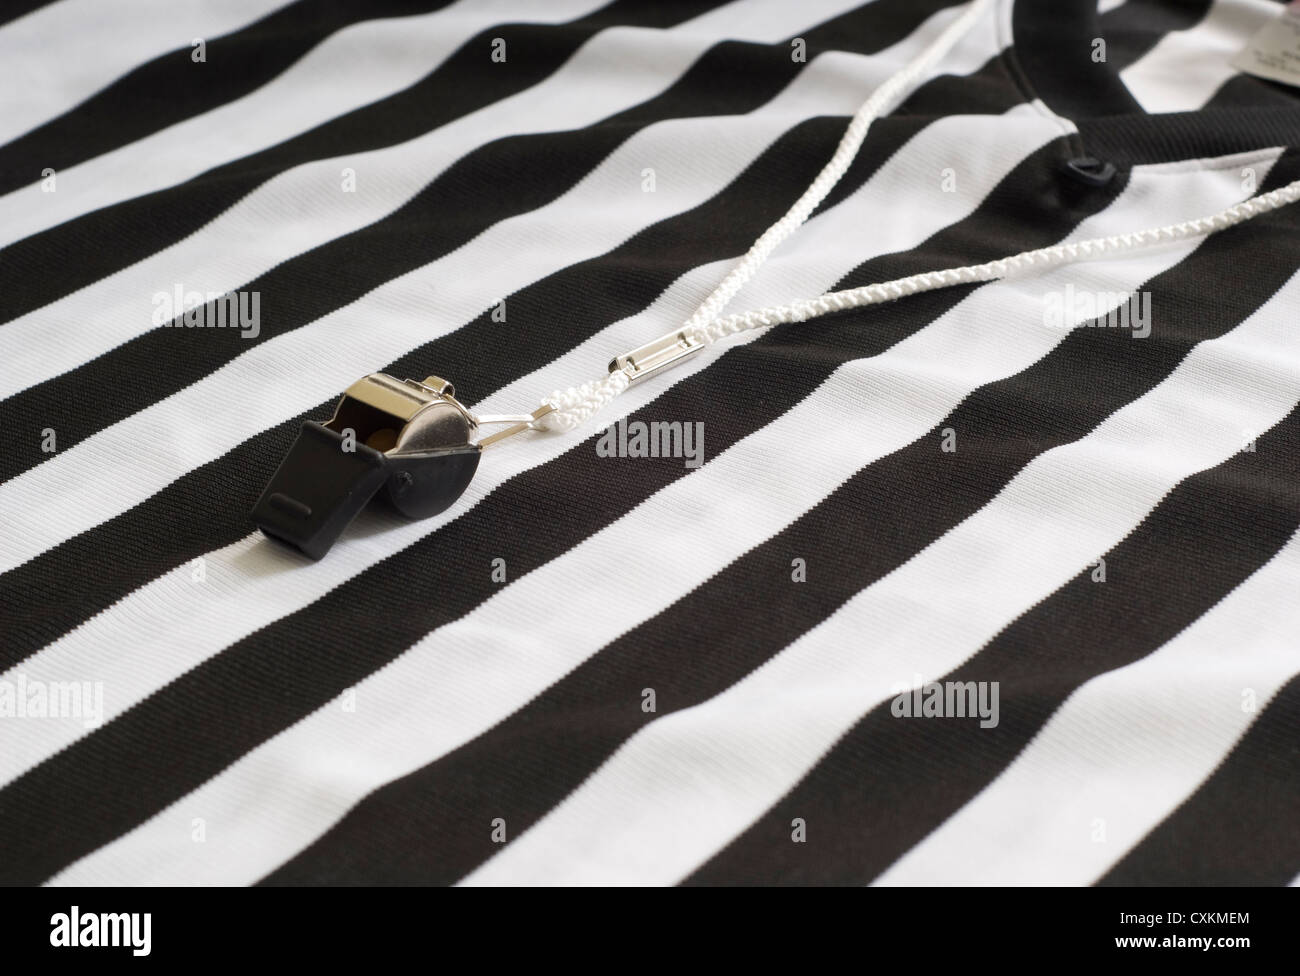 A referee striped shirt with a whistle, sports equipment, authority concept Stock Photo